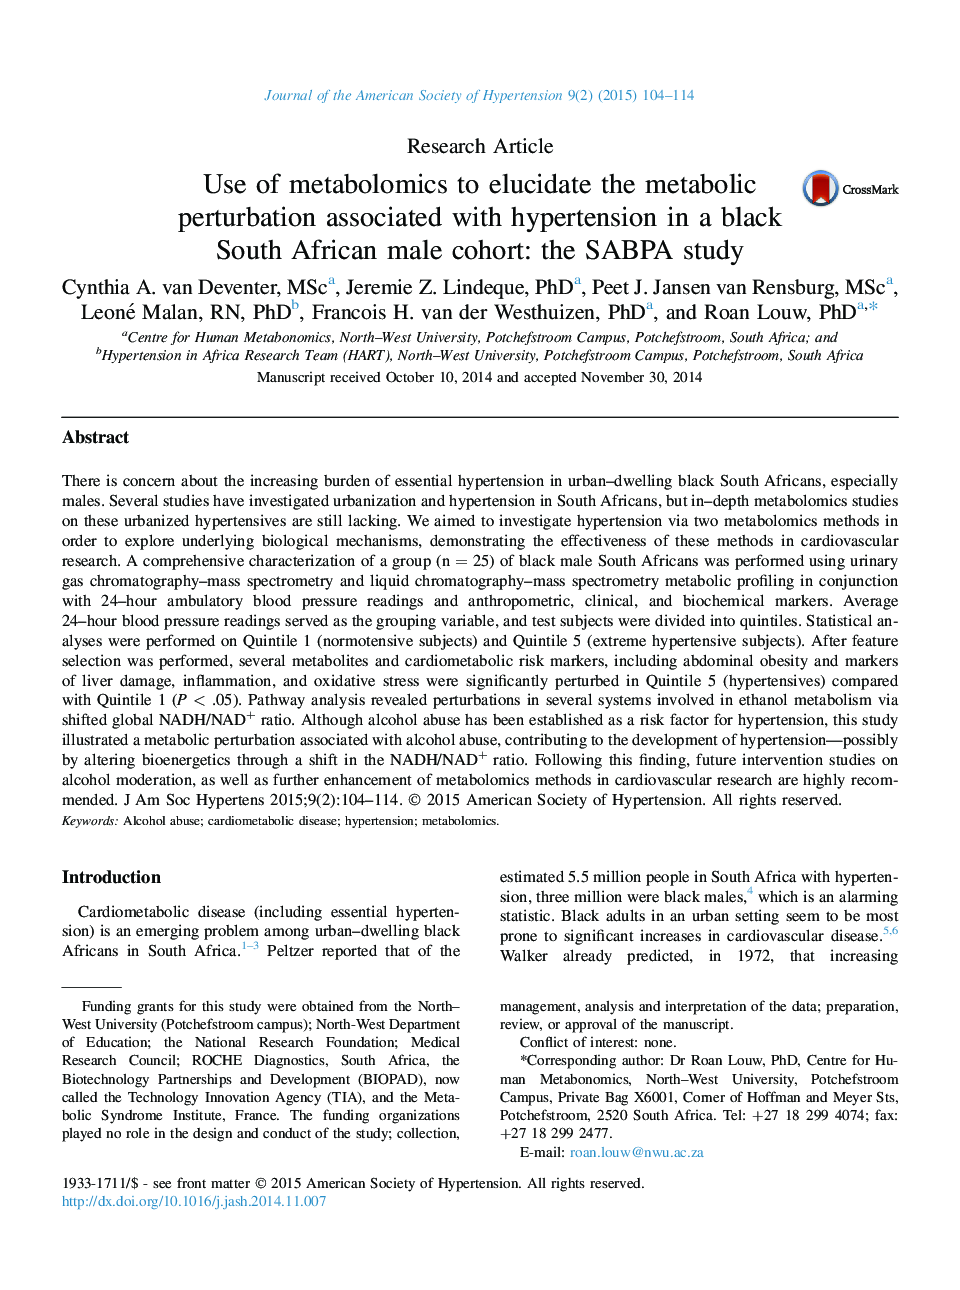 Use of metabolomics to elucidate the metabolic perturbation associated with hypertension in a black South African male cohort: the SABPA study 